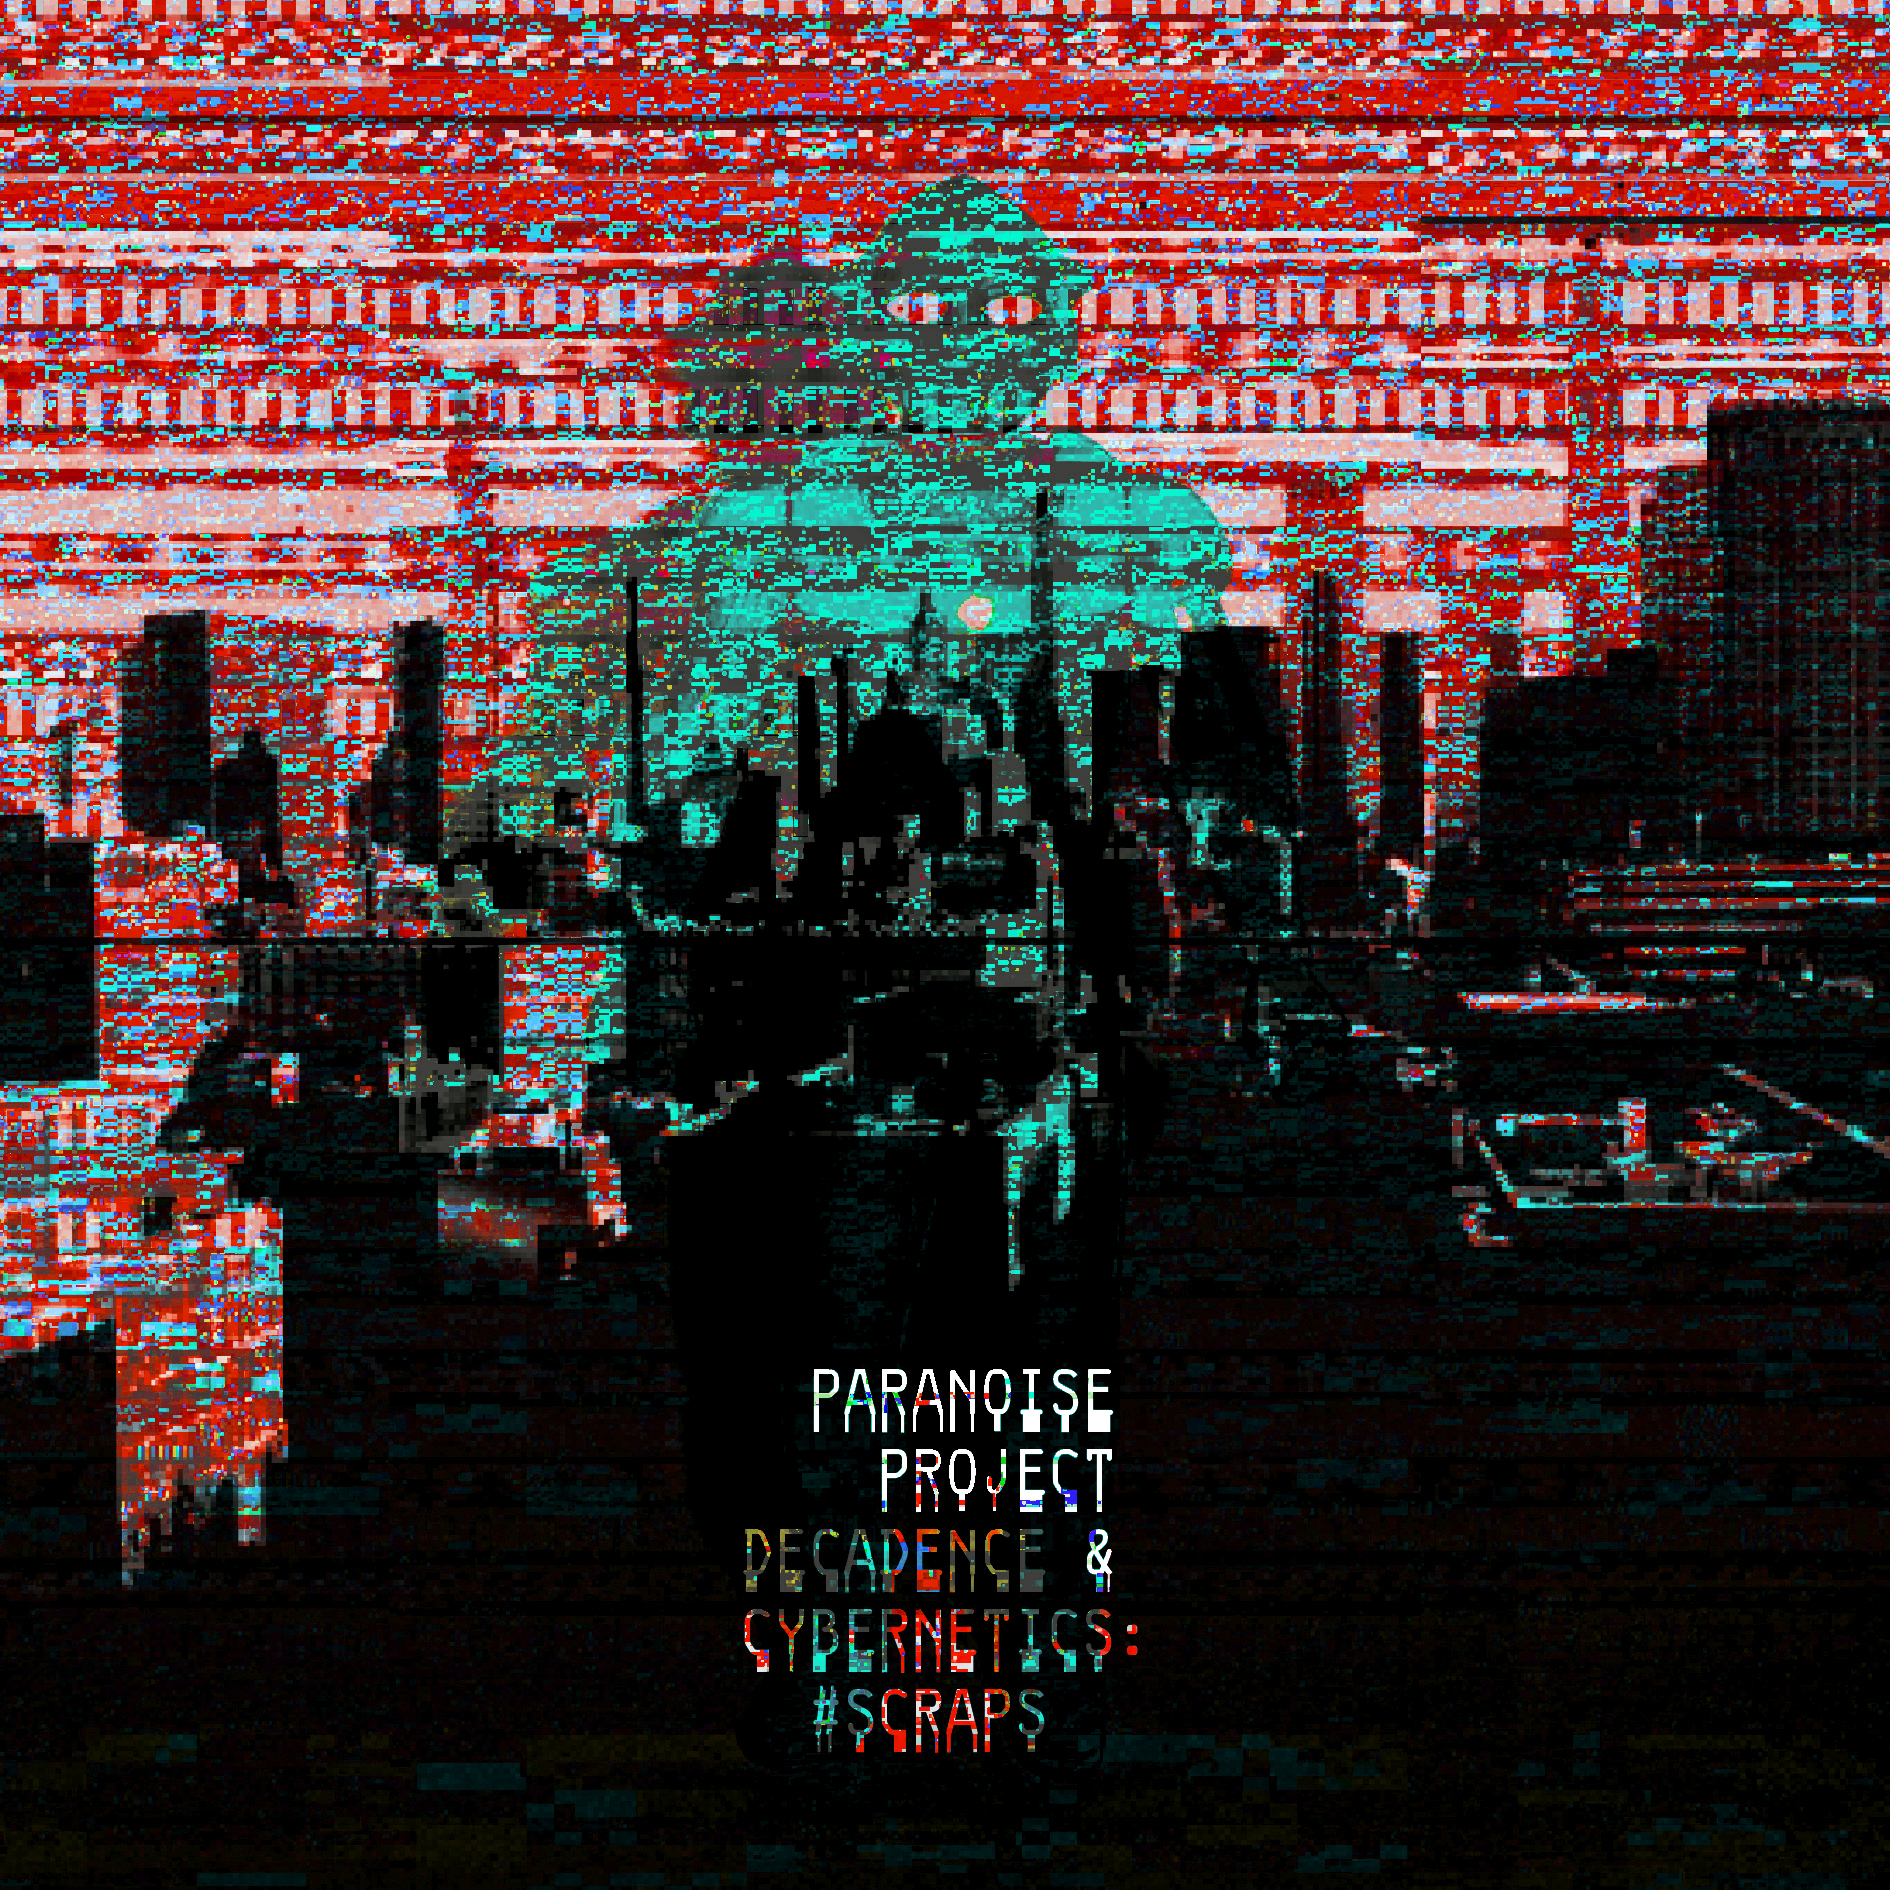 Paranoise Project. Decadence & Cybernetics #scraps!. Front Cover. 2019